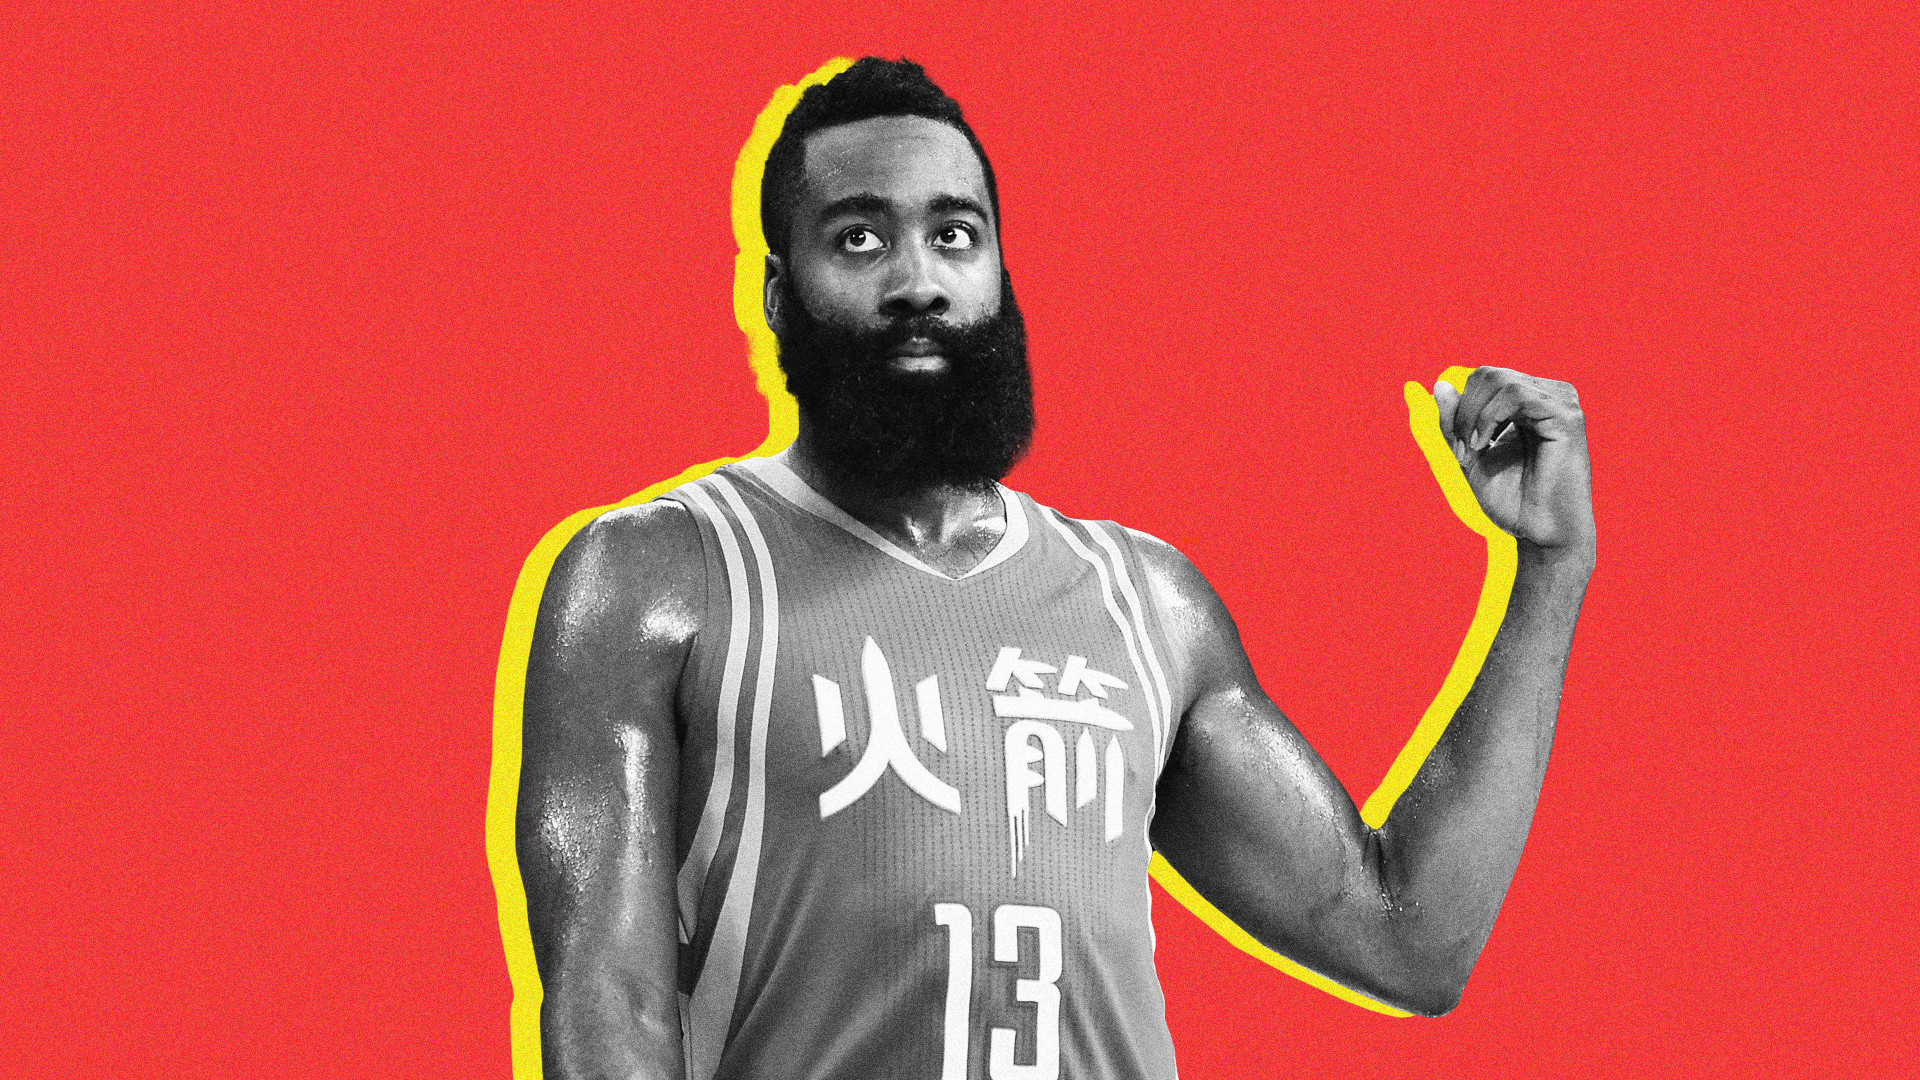 The NBA is facing a clash between its business interests and brand identity in China